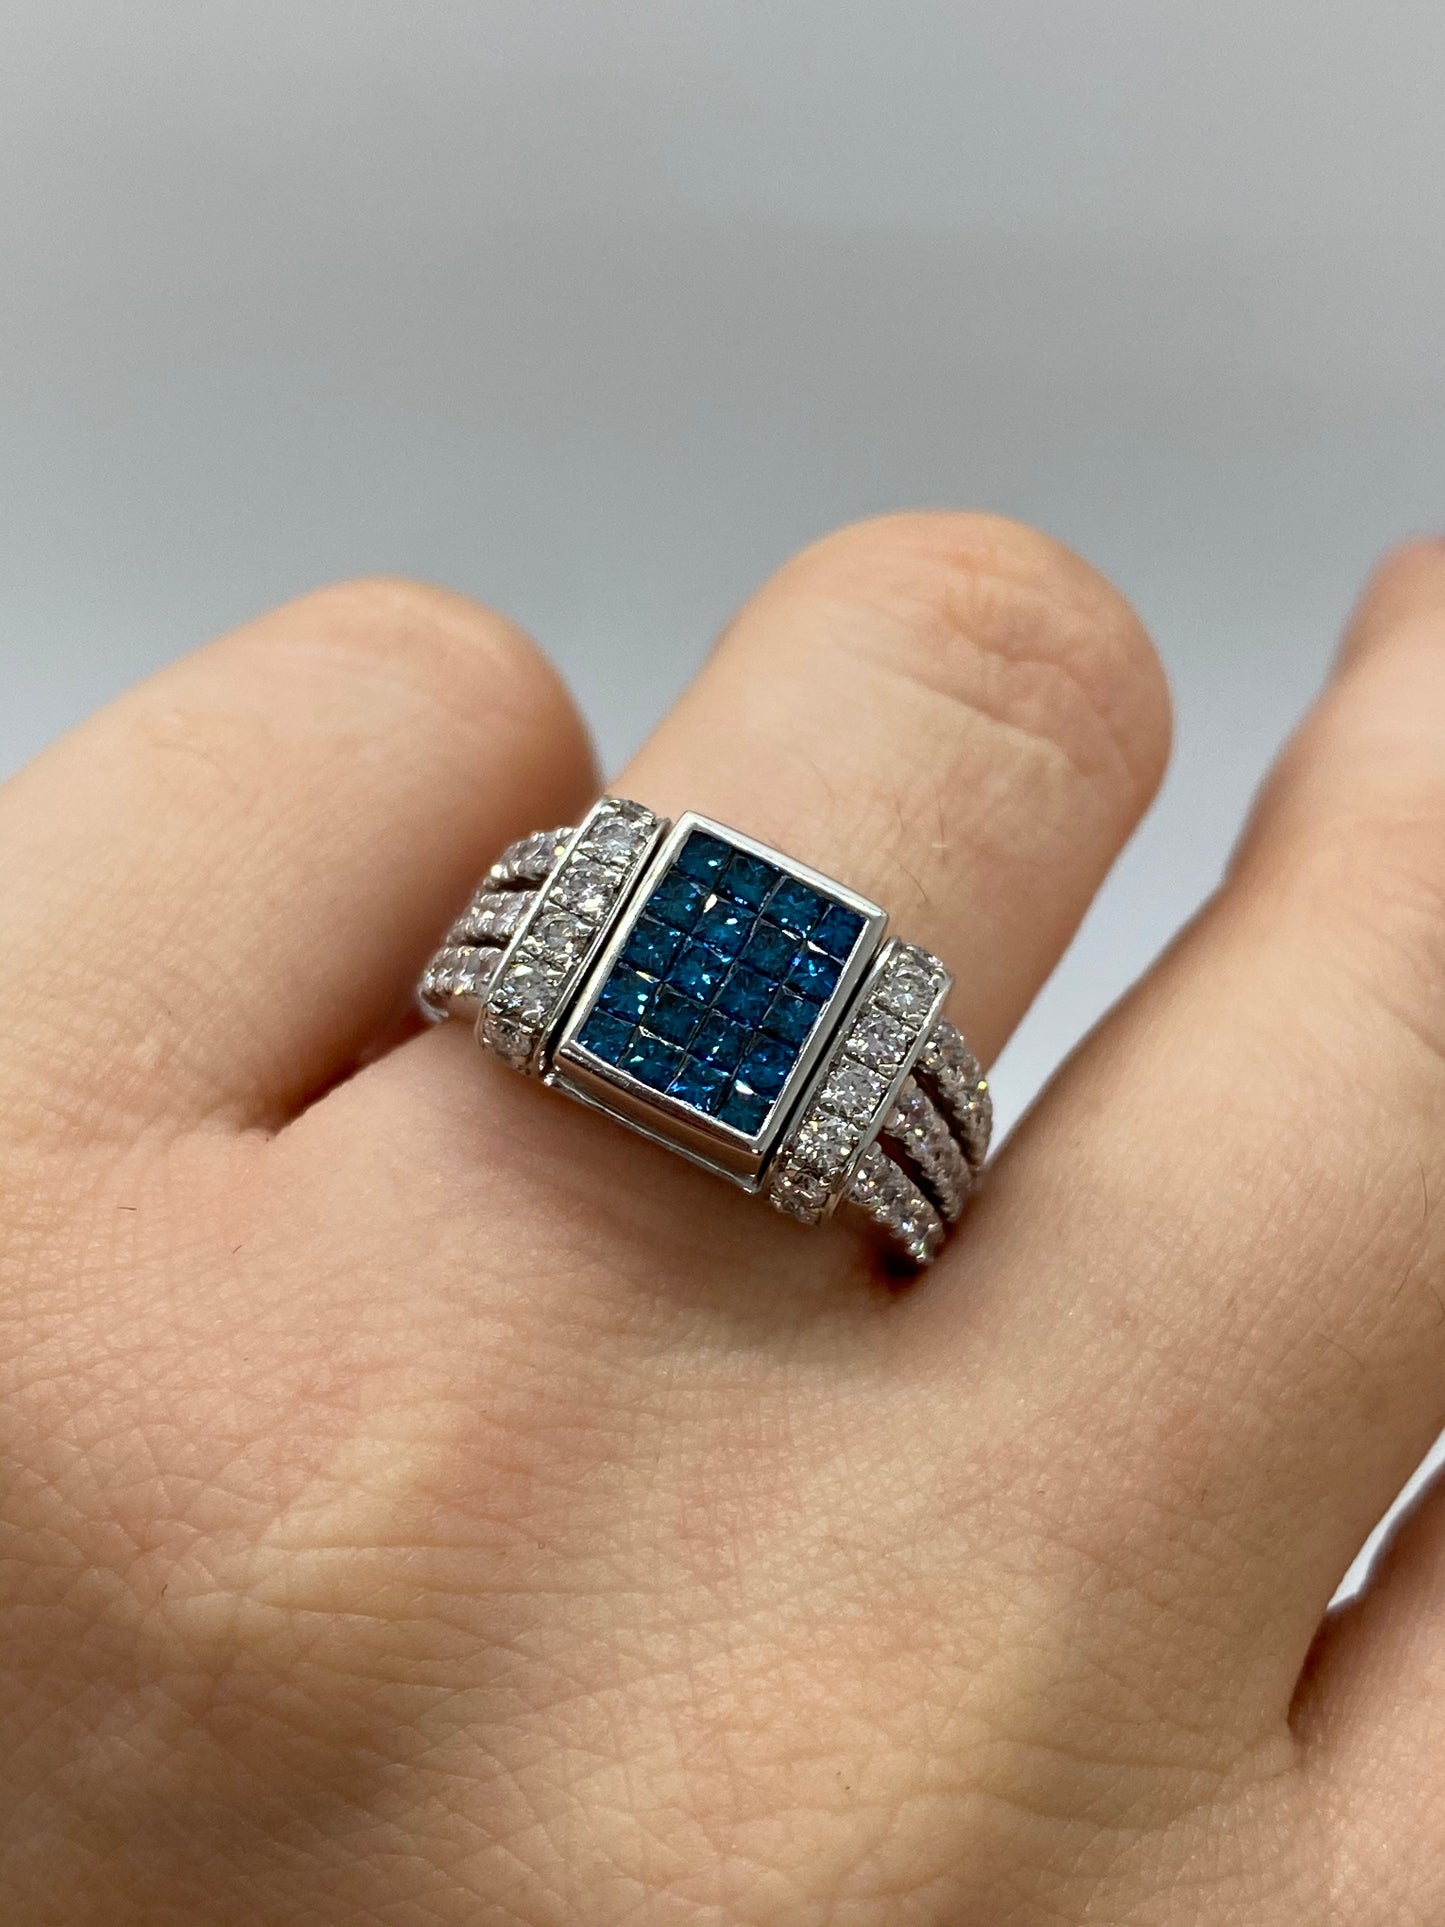 Blue Diamond Ring R20056 - Royal Gems and Jewelry